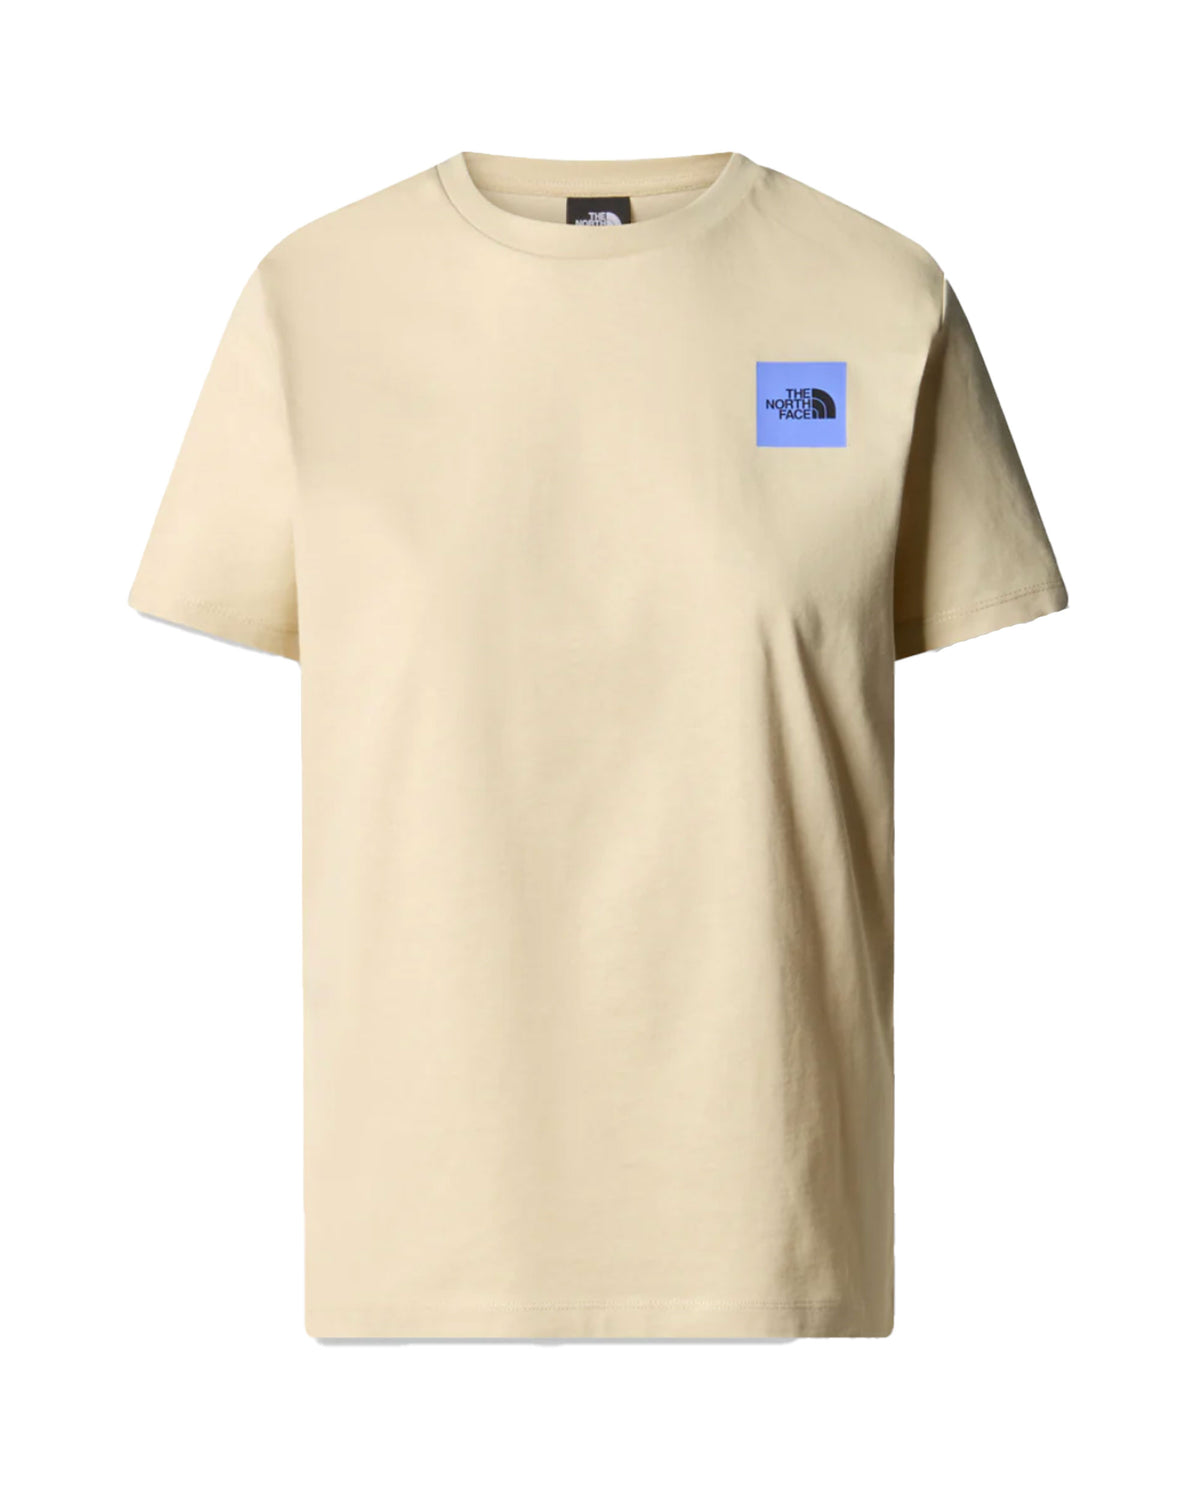 Woman's Tee The North Face Coordinate Gravel Beige